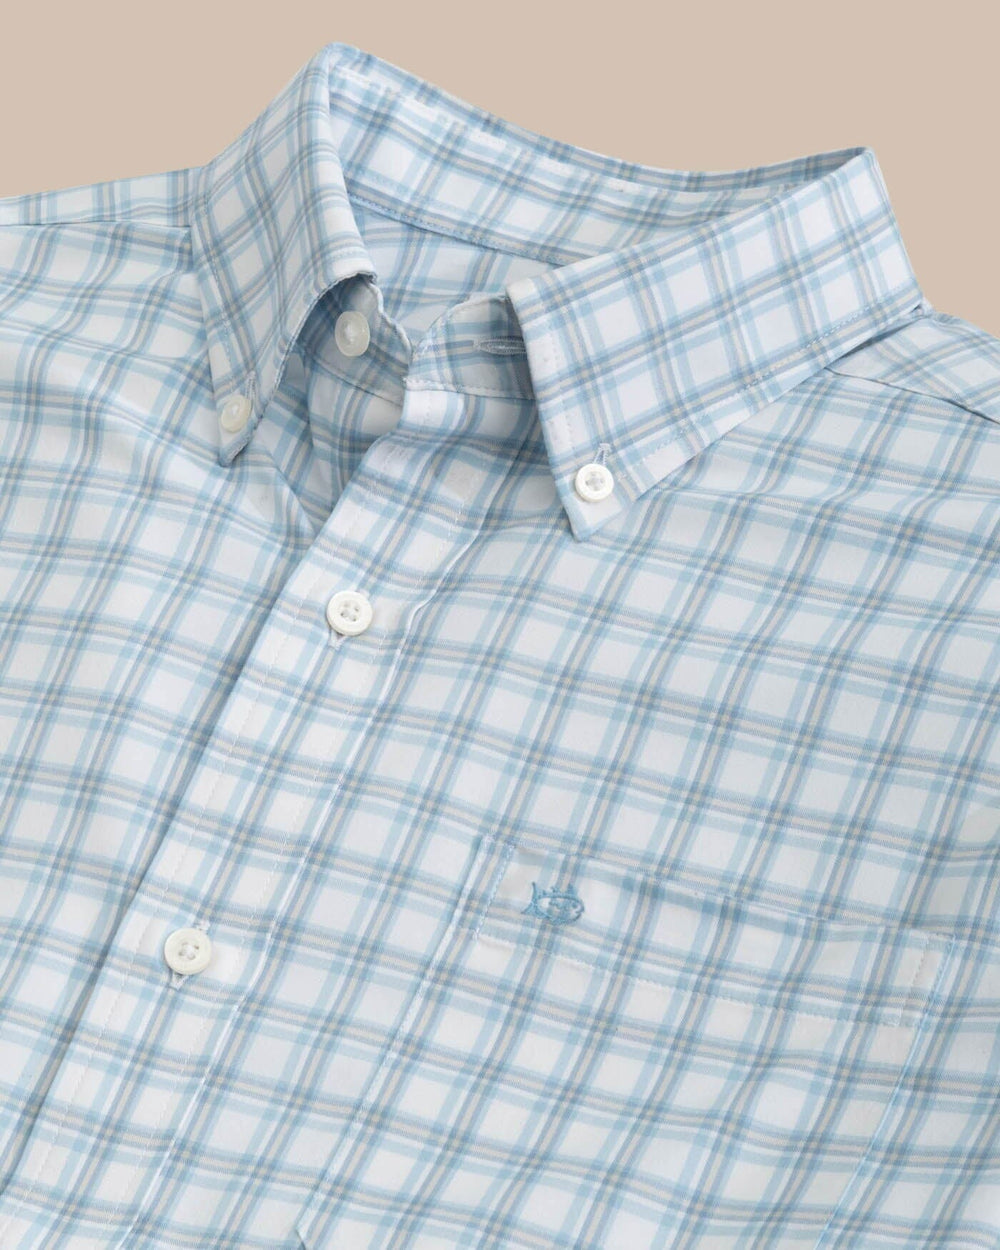 The detail view of the Southern Tide Ellington Plaid Intercoastal Sport Shirts by Southern Tide - Dream Blue